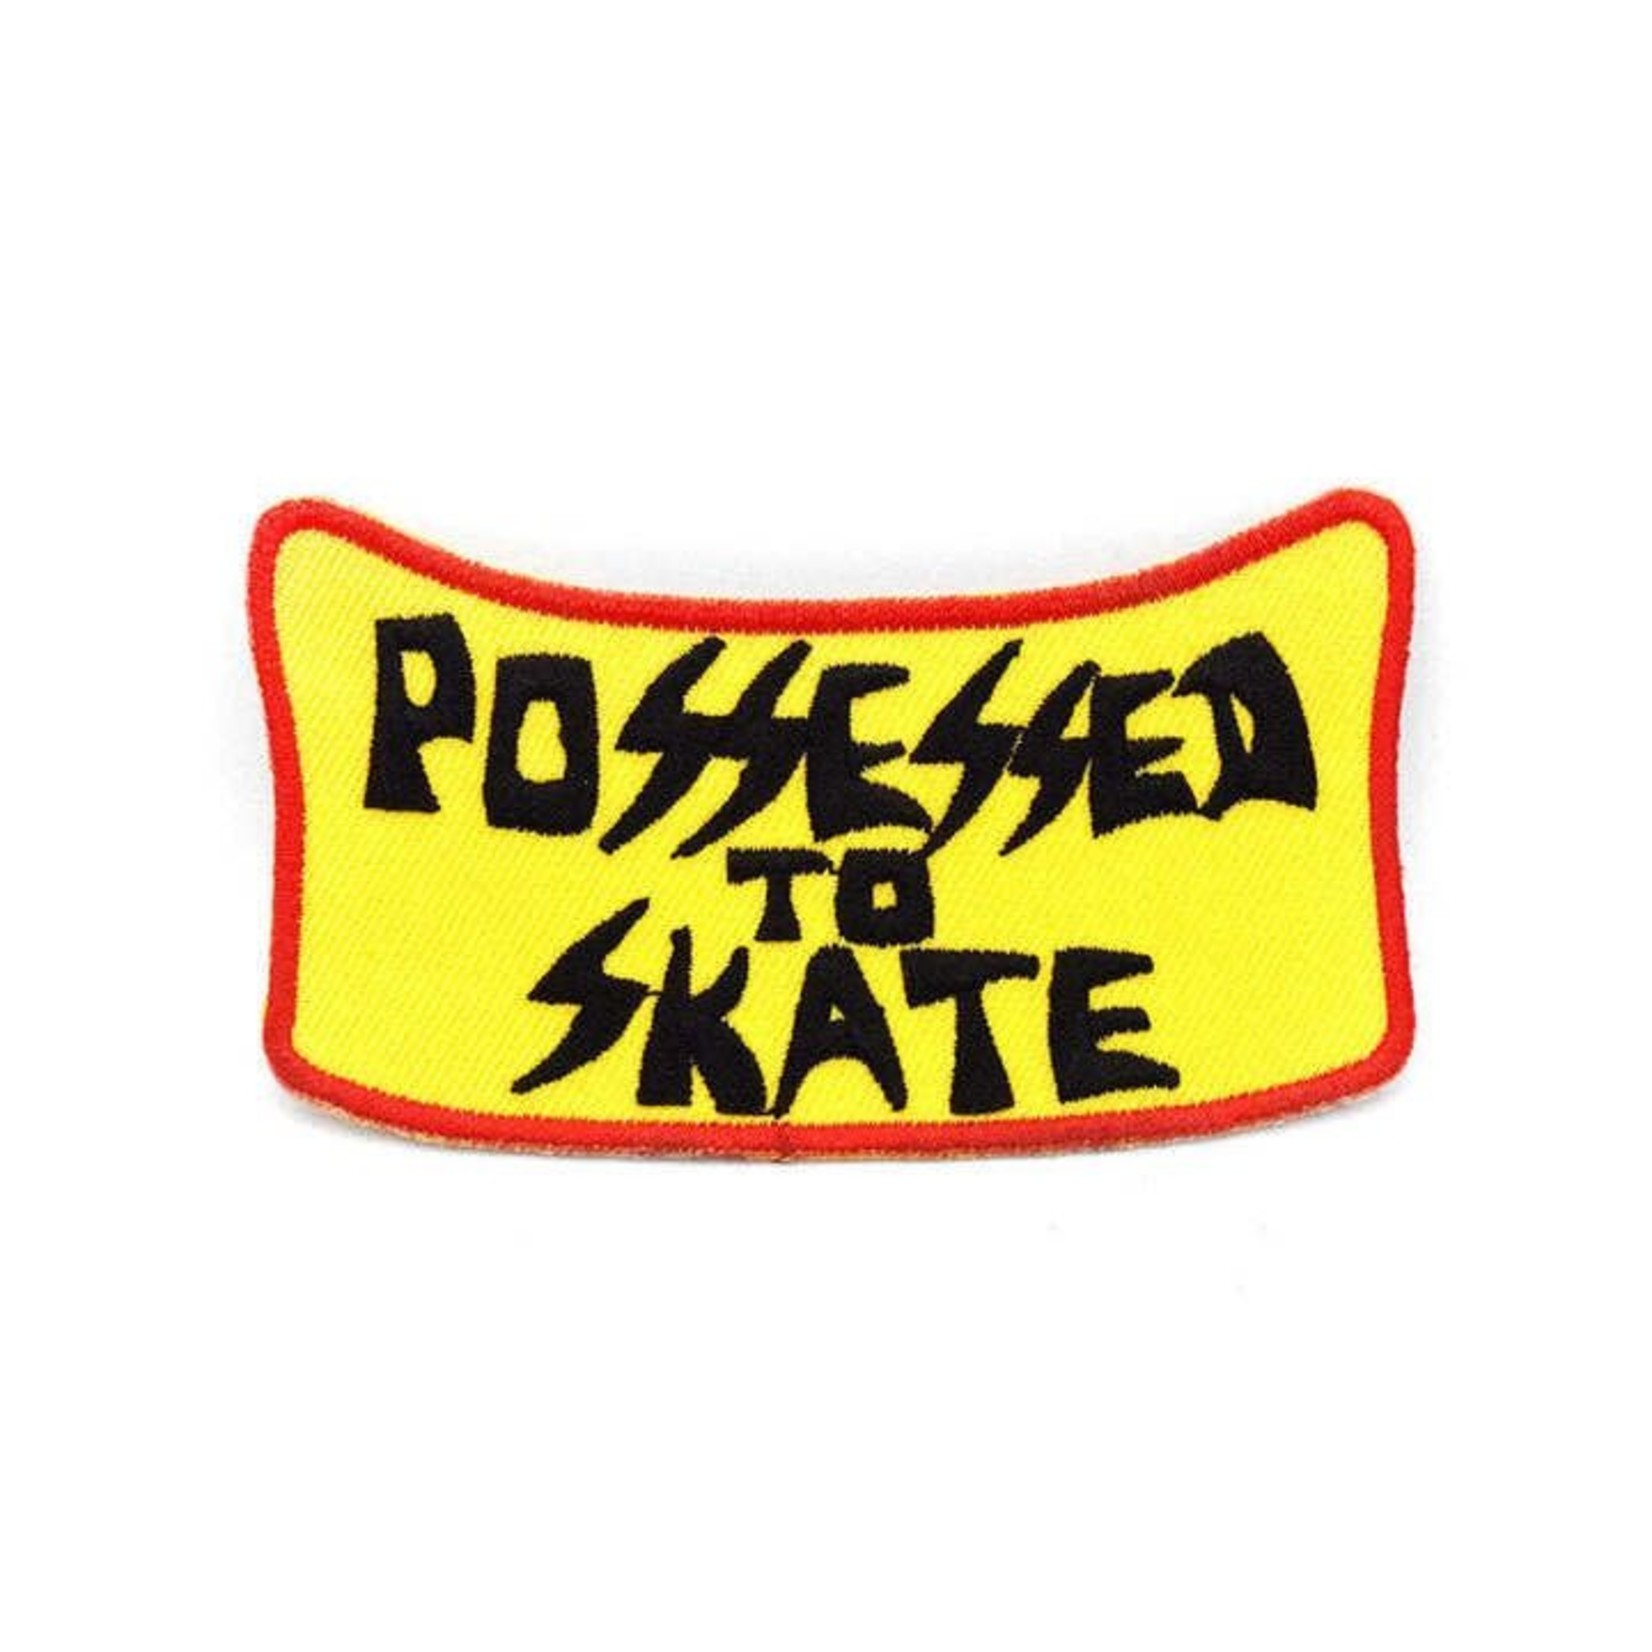 Suicidal Skates Suicidal Skates Possessed to Skate Patch 3.25" x 2" - Yellow